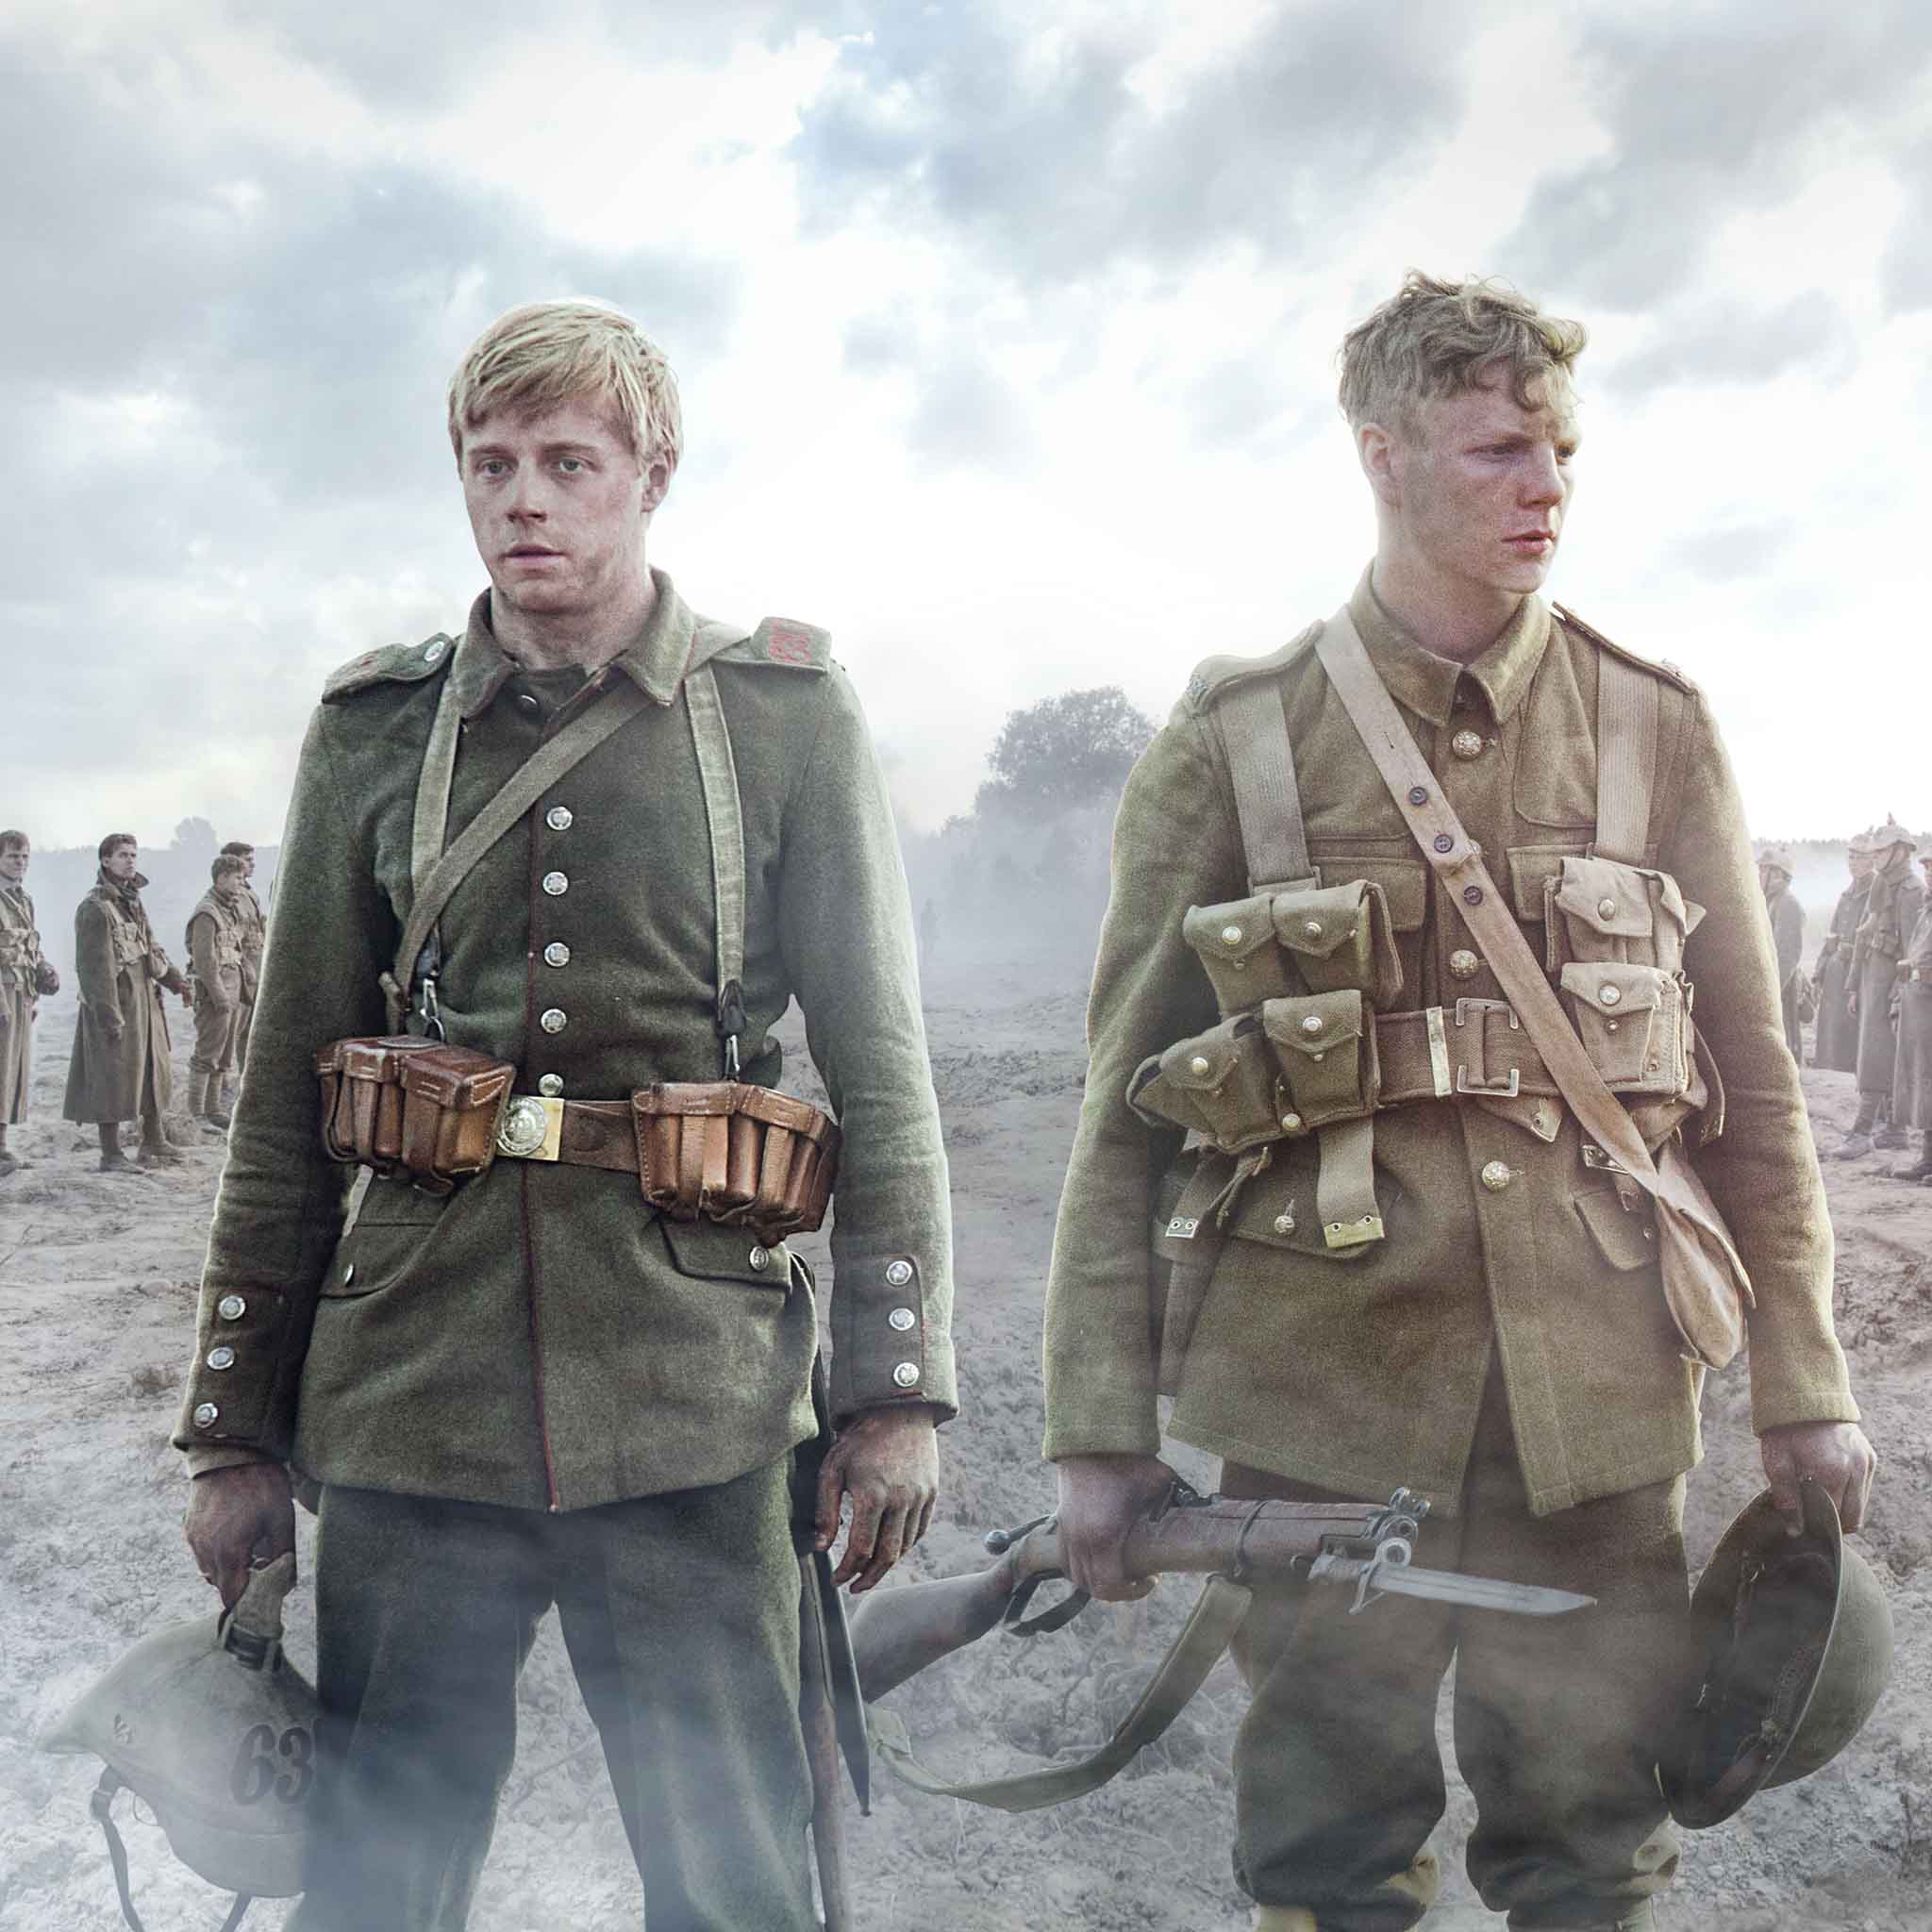 The Passing Bells, with Michael (Jack Lowden) and Thomas (Paddy Gibson)